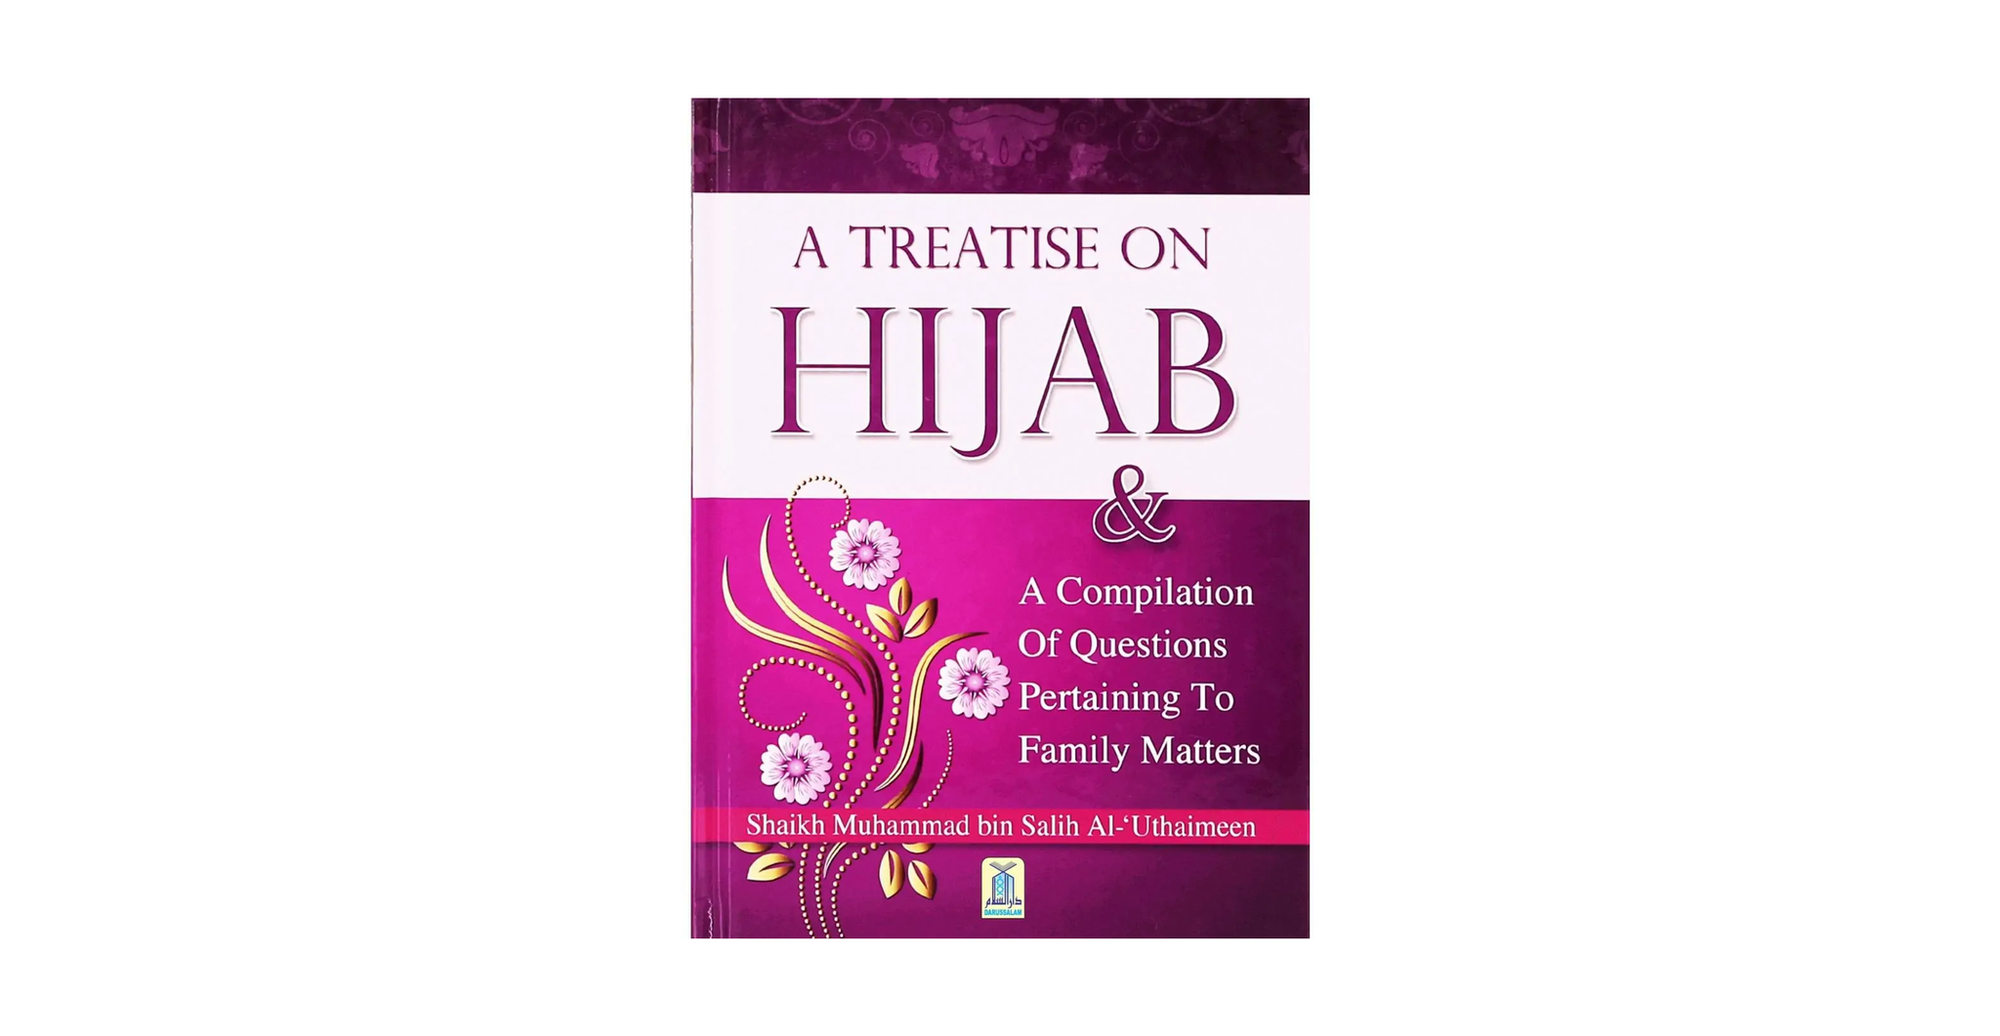 A Treatise On Hijab & A Compilation Of Questions Pertaining To Family Matters